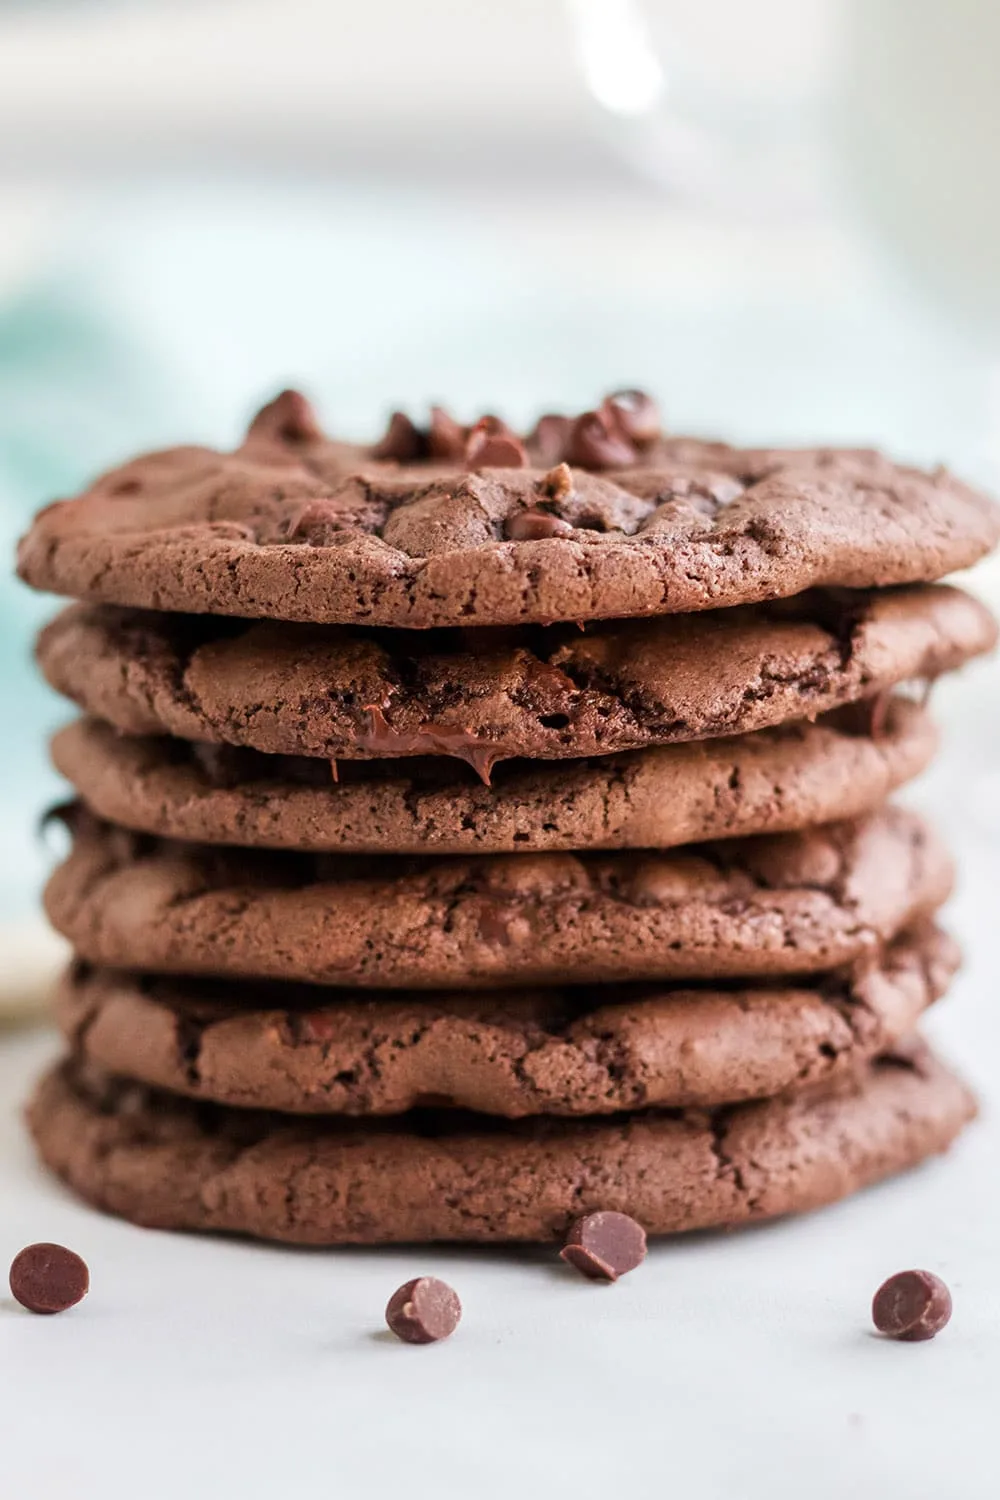 Stack of brownie cookies with chocolate chips on a white table with a blue napkin.